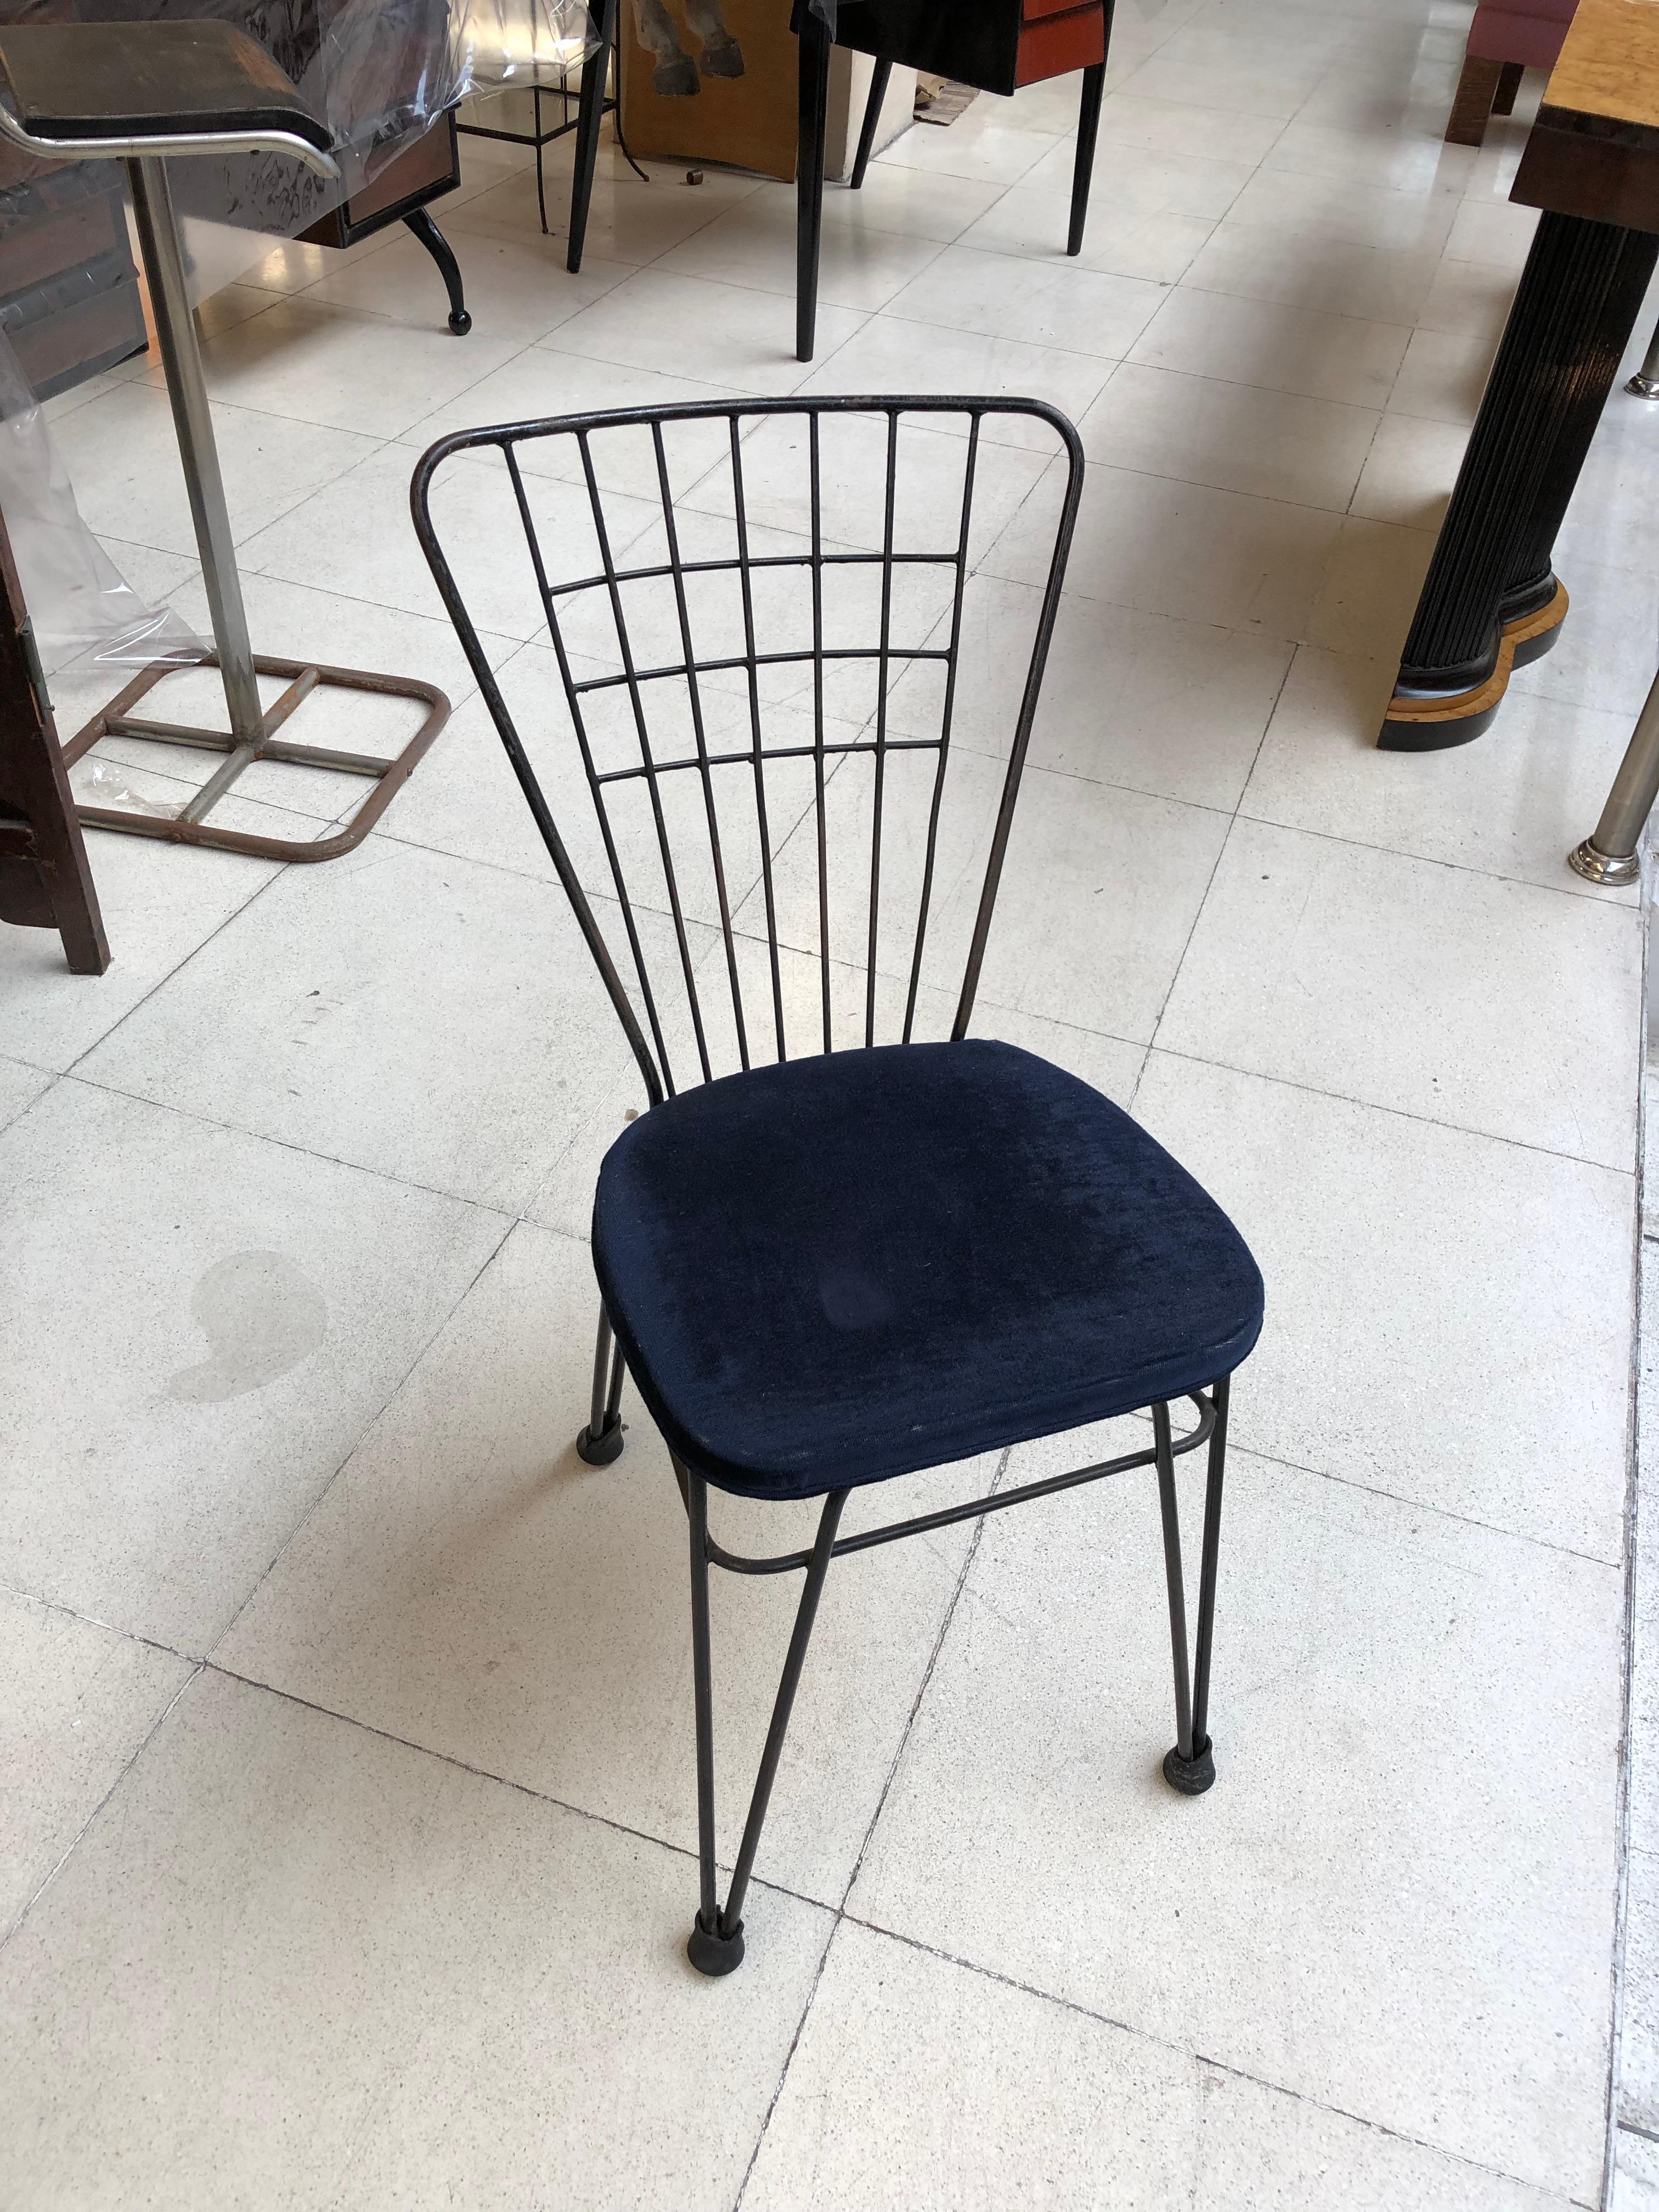 Chair
We have specialized in the sale of Art Deco and Art Nouveau and Vintage styles since 1982. If you have any questions we are at your disposal.
Pushing the button that reads 'View All From Seller'. And you can see more objects to the style for